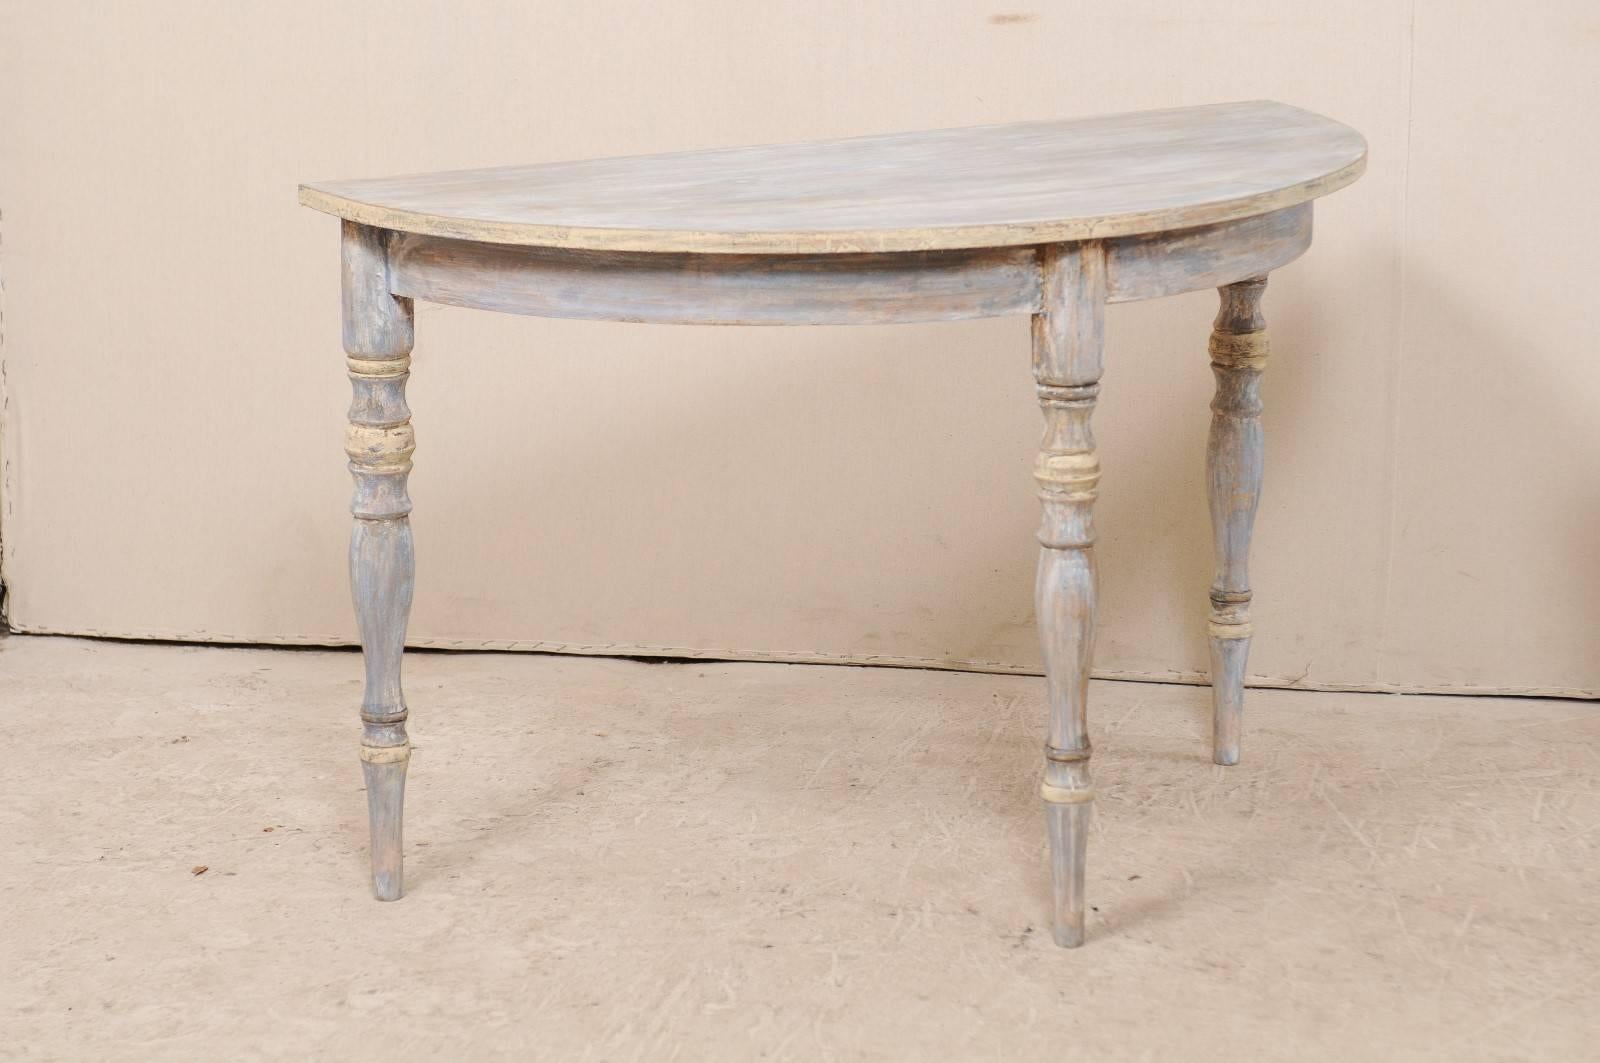 Carved Pair of 19th Century Swedish Demilune Tables of Soft Blue, Grey and Cream